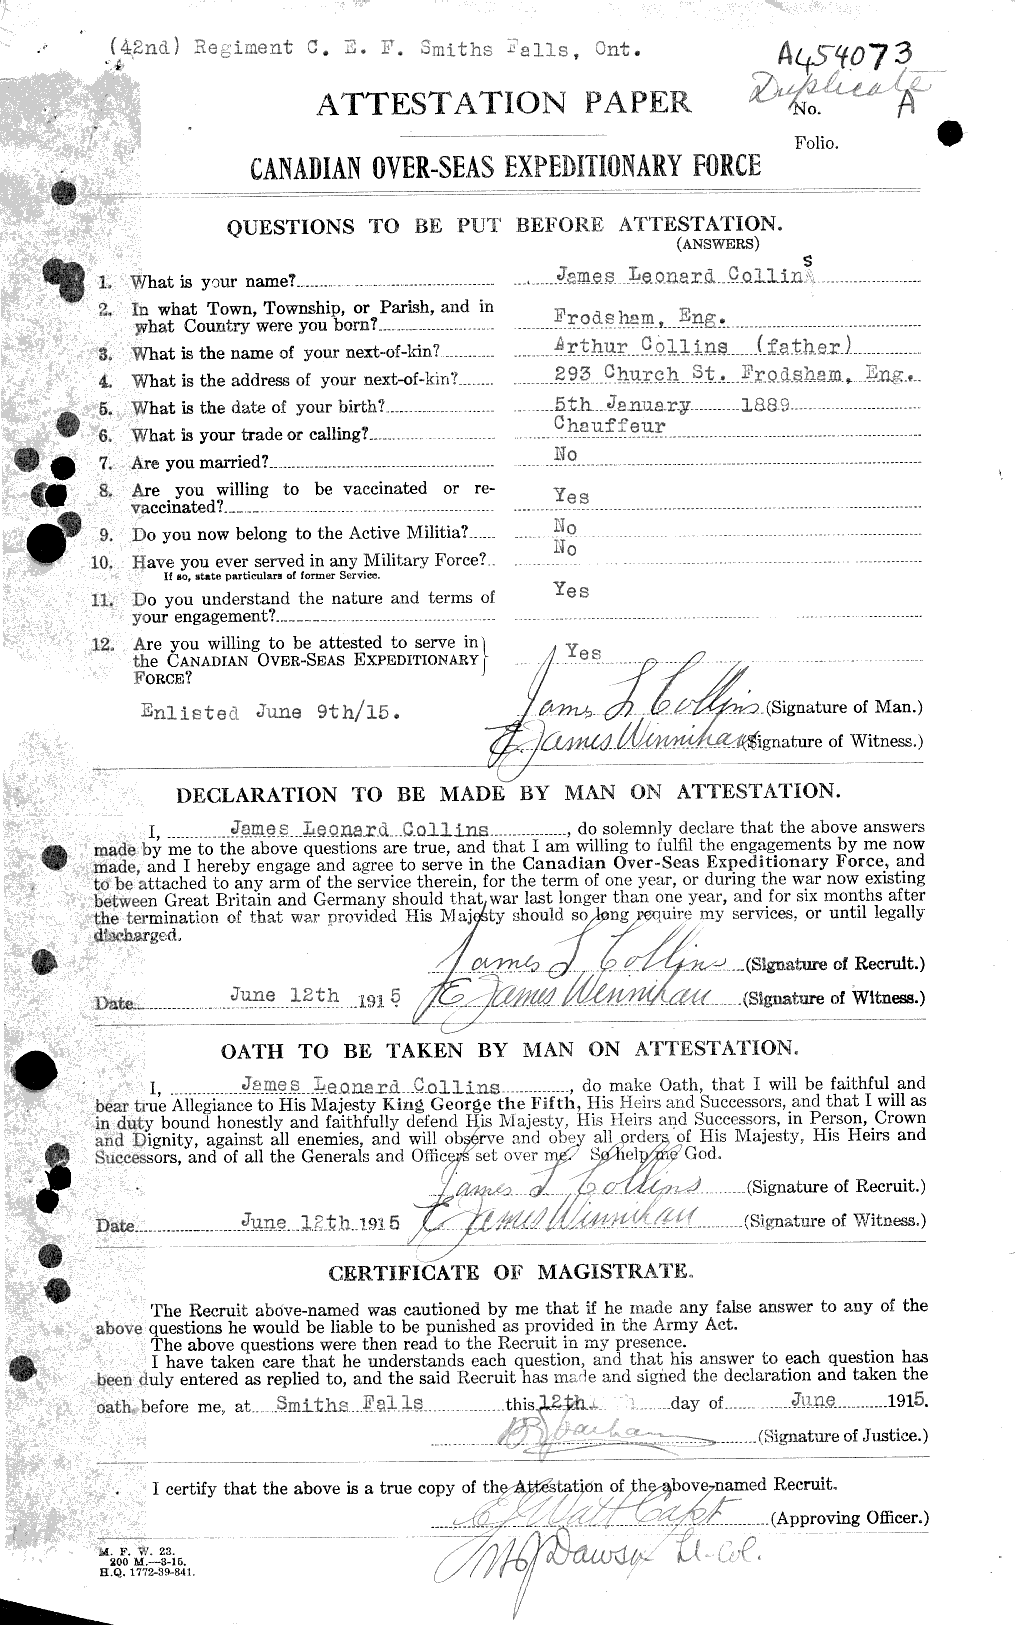 Personnel Records of the First World War - CEF 037941a